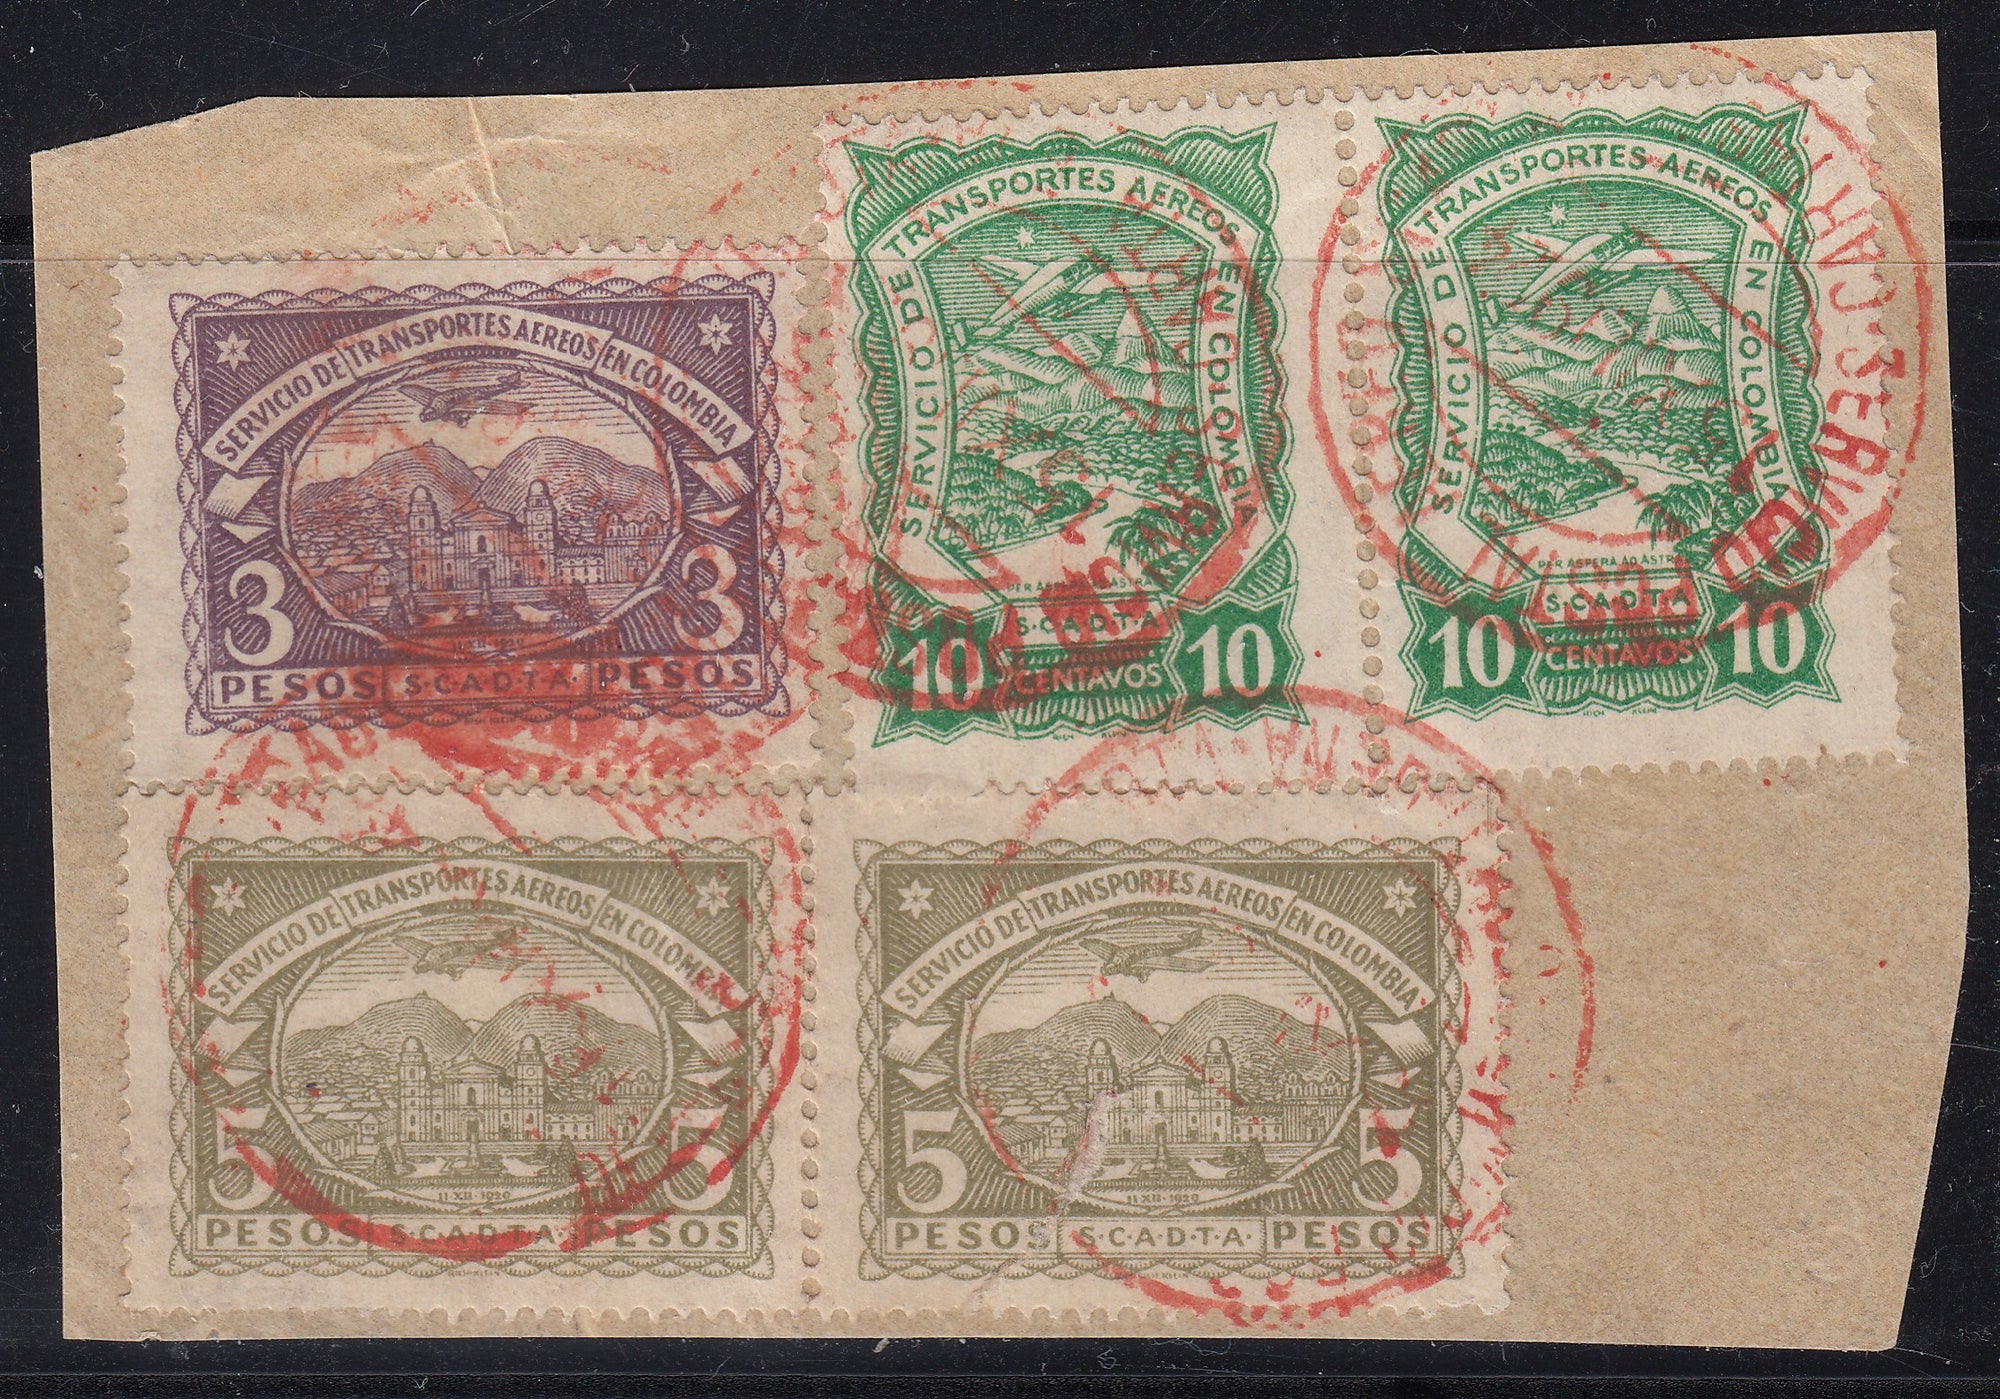 Colombia SCADTA 1923-28 3p & 5p Airmail High Values on Piece Used. Scott C39, C49, C50